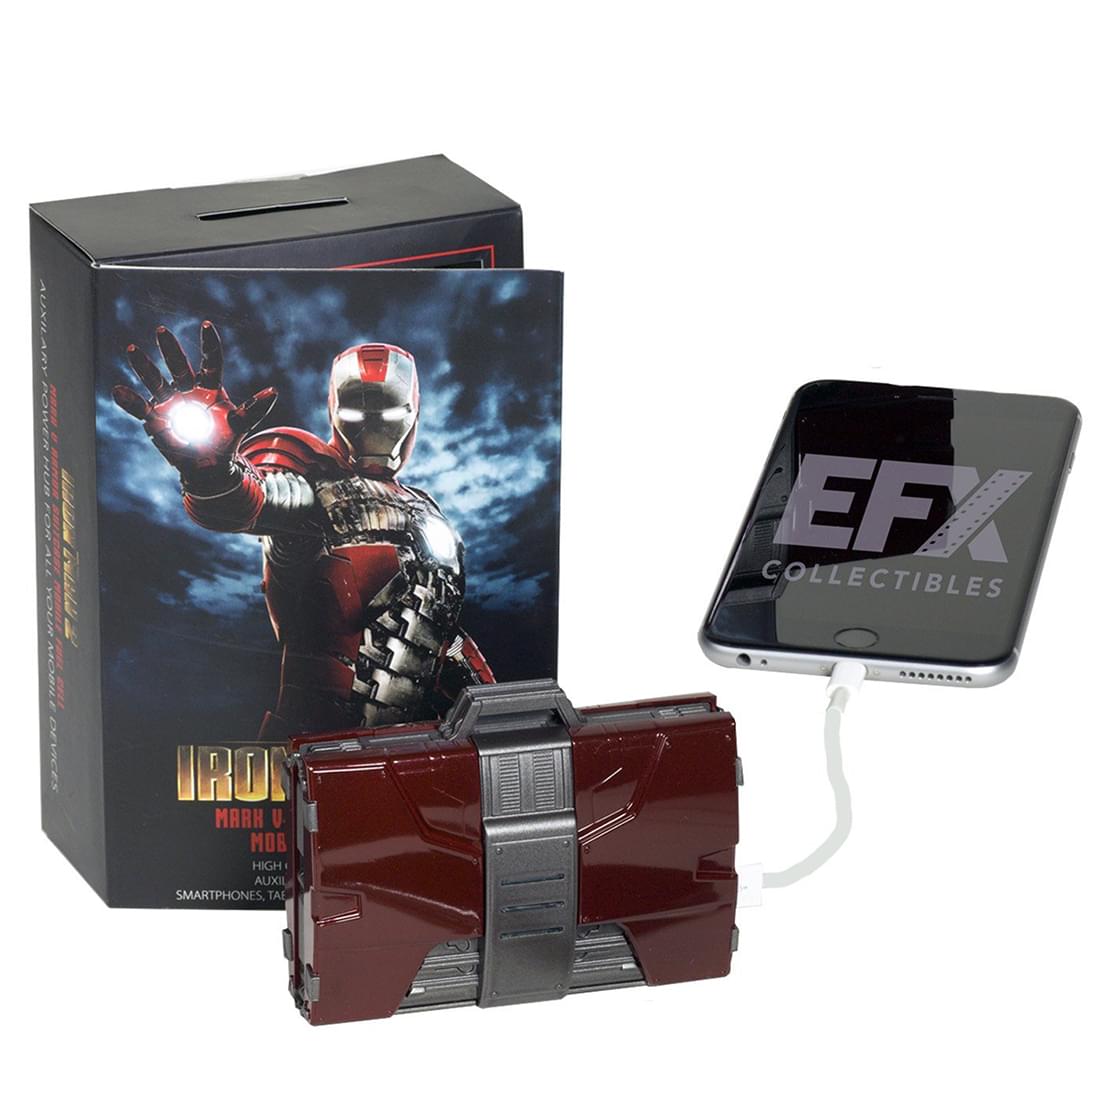 Marvel Iron Man Mark V Armor Suitcase Mobile Battery Charger (1/4 Scale)